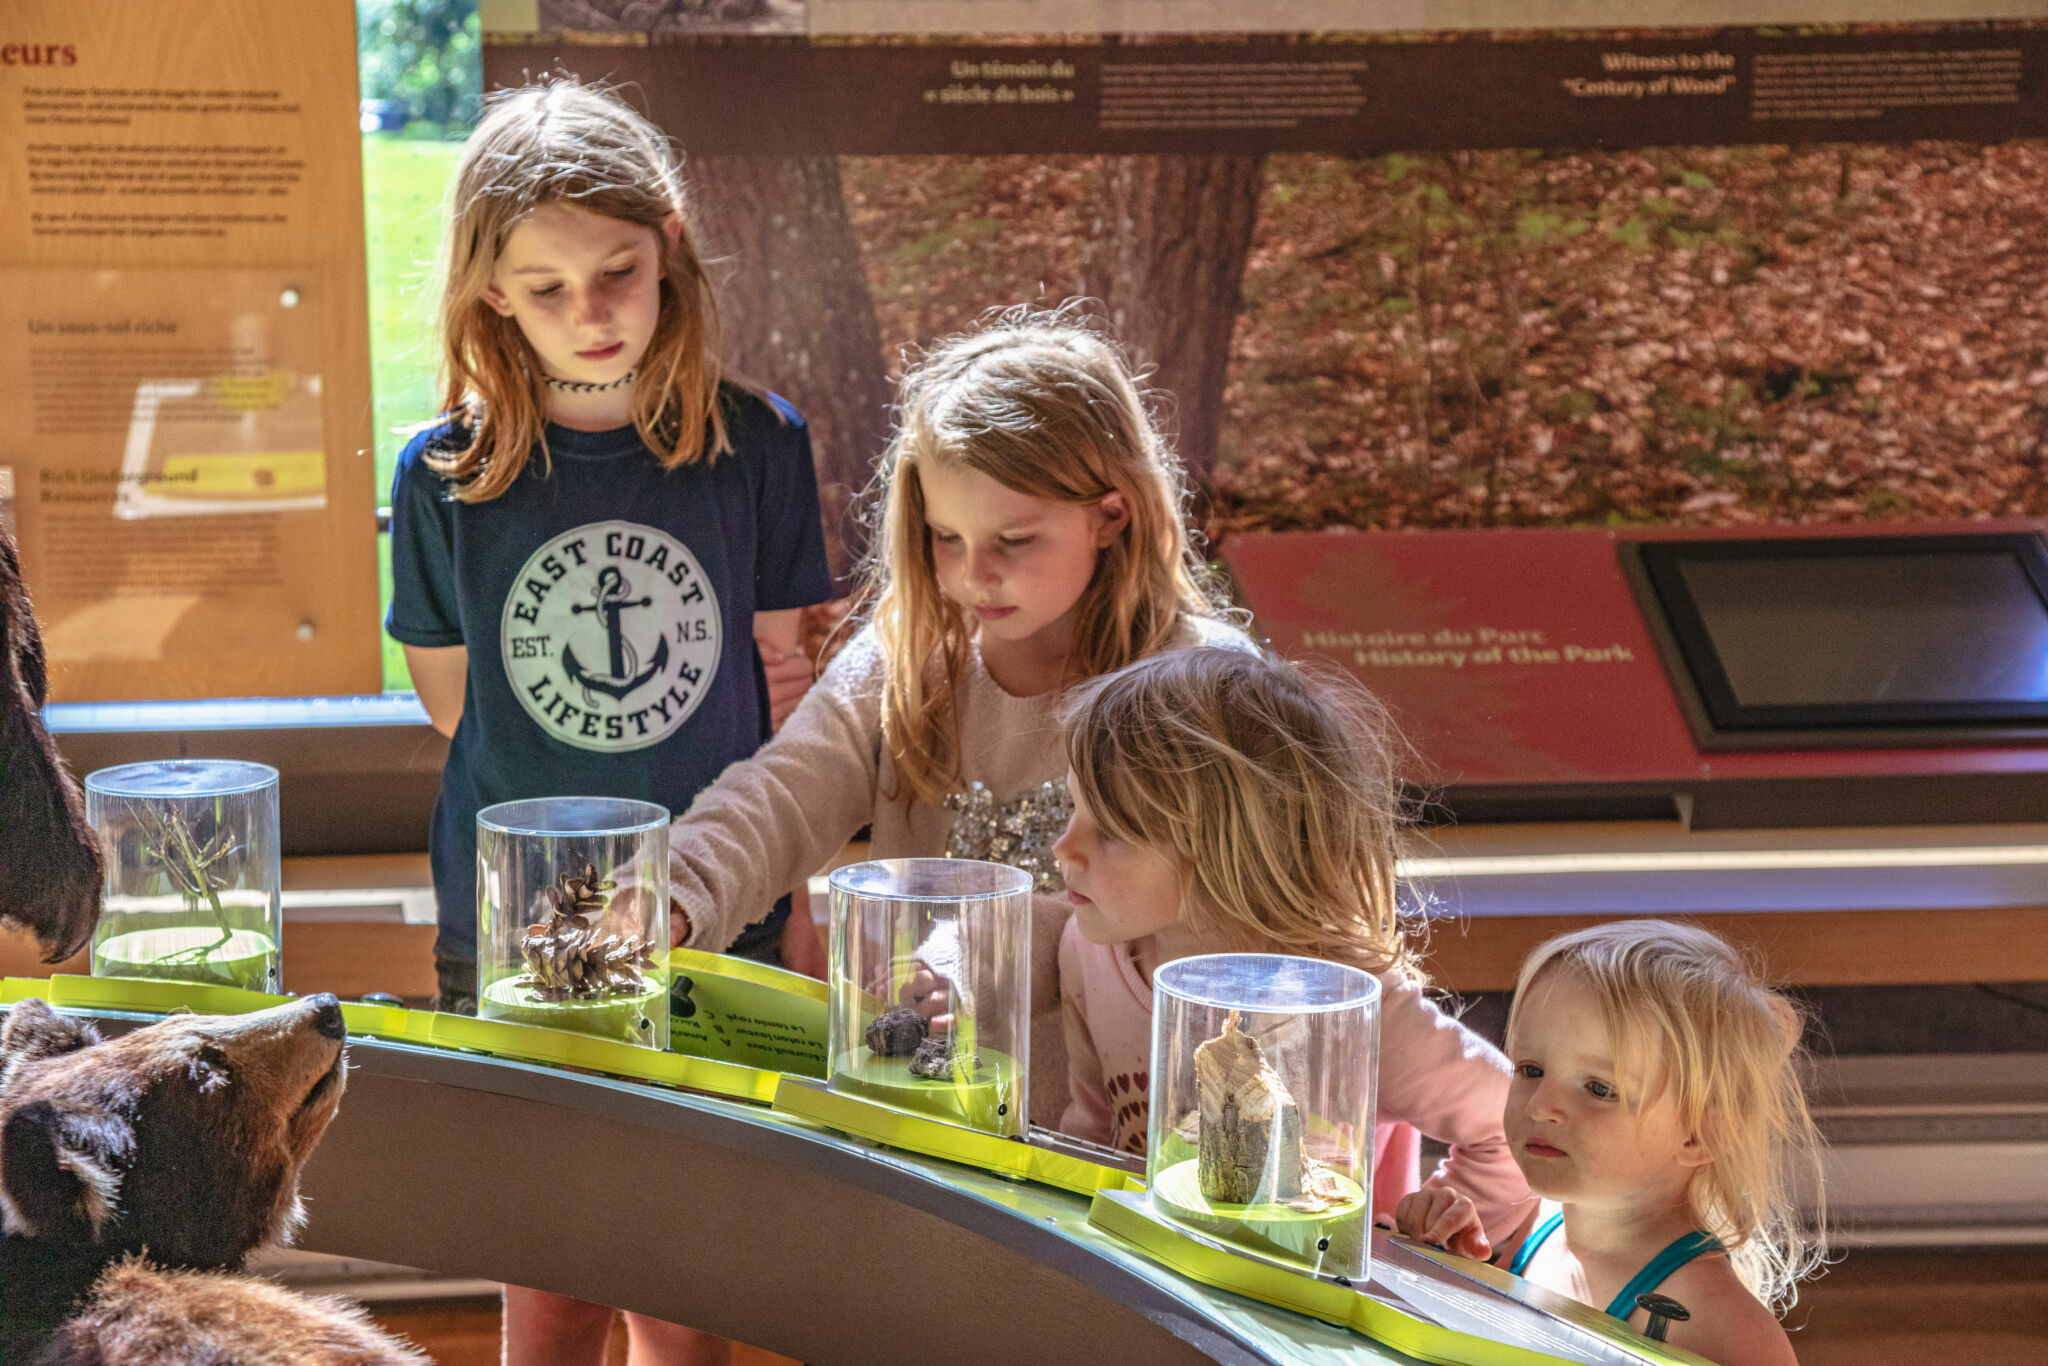 Children interacting with the Gatineau Park Visitor Centre exhibit